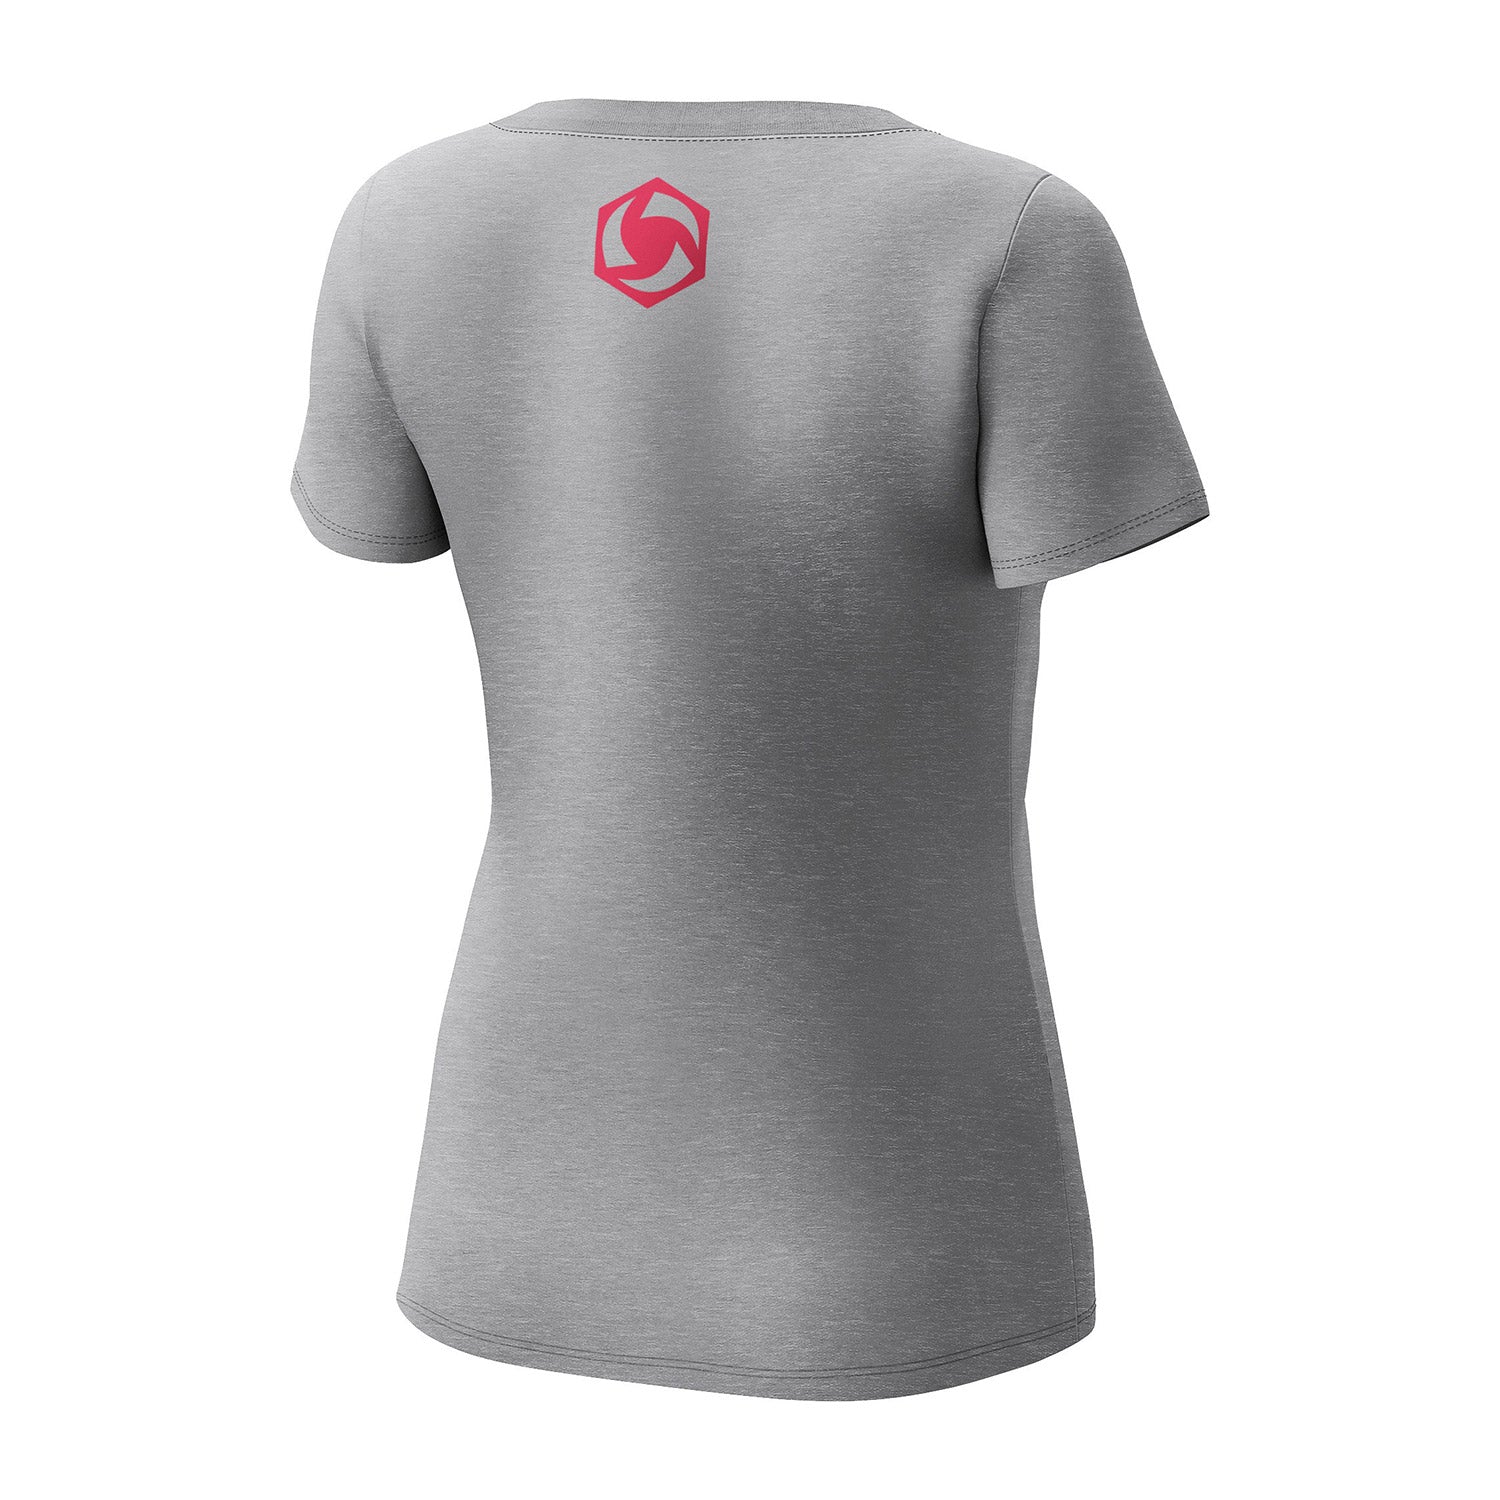 Heroes of the Storm Women's Grey T-Shirt - Back View